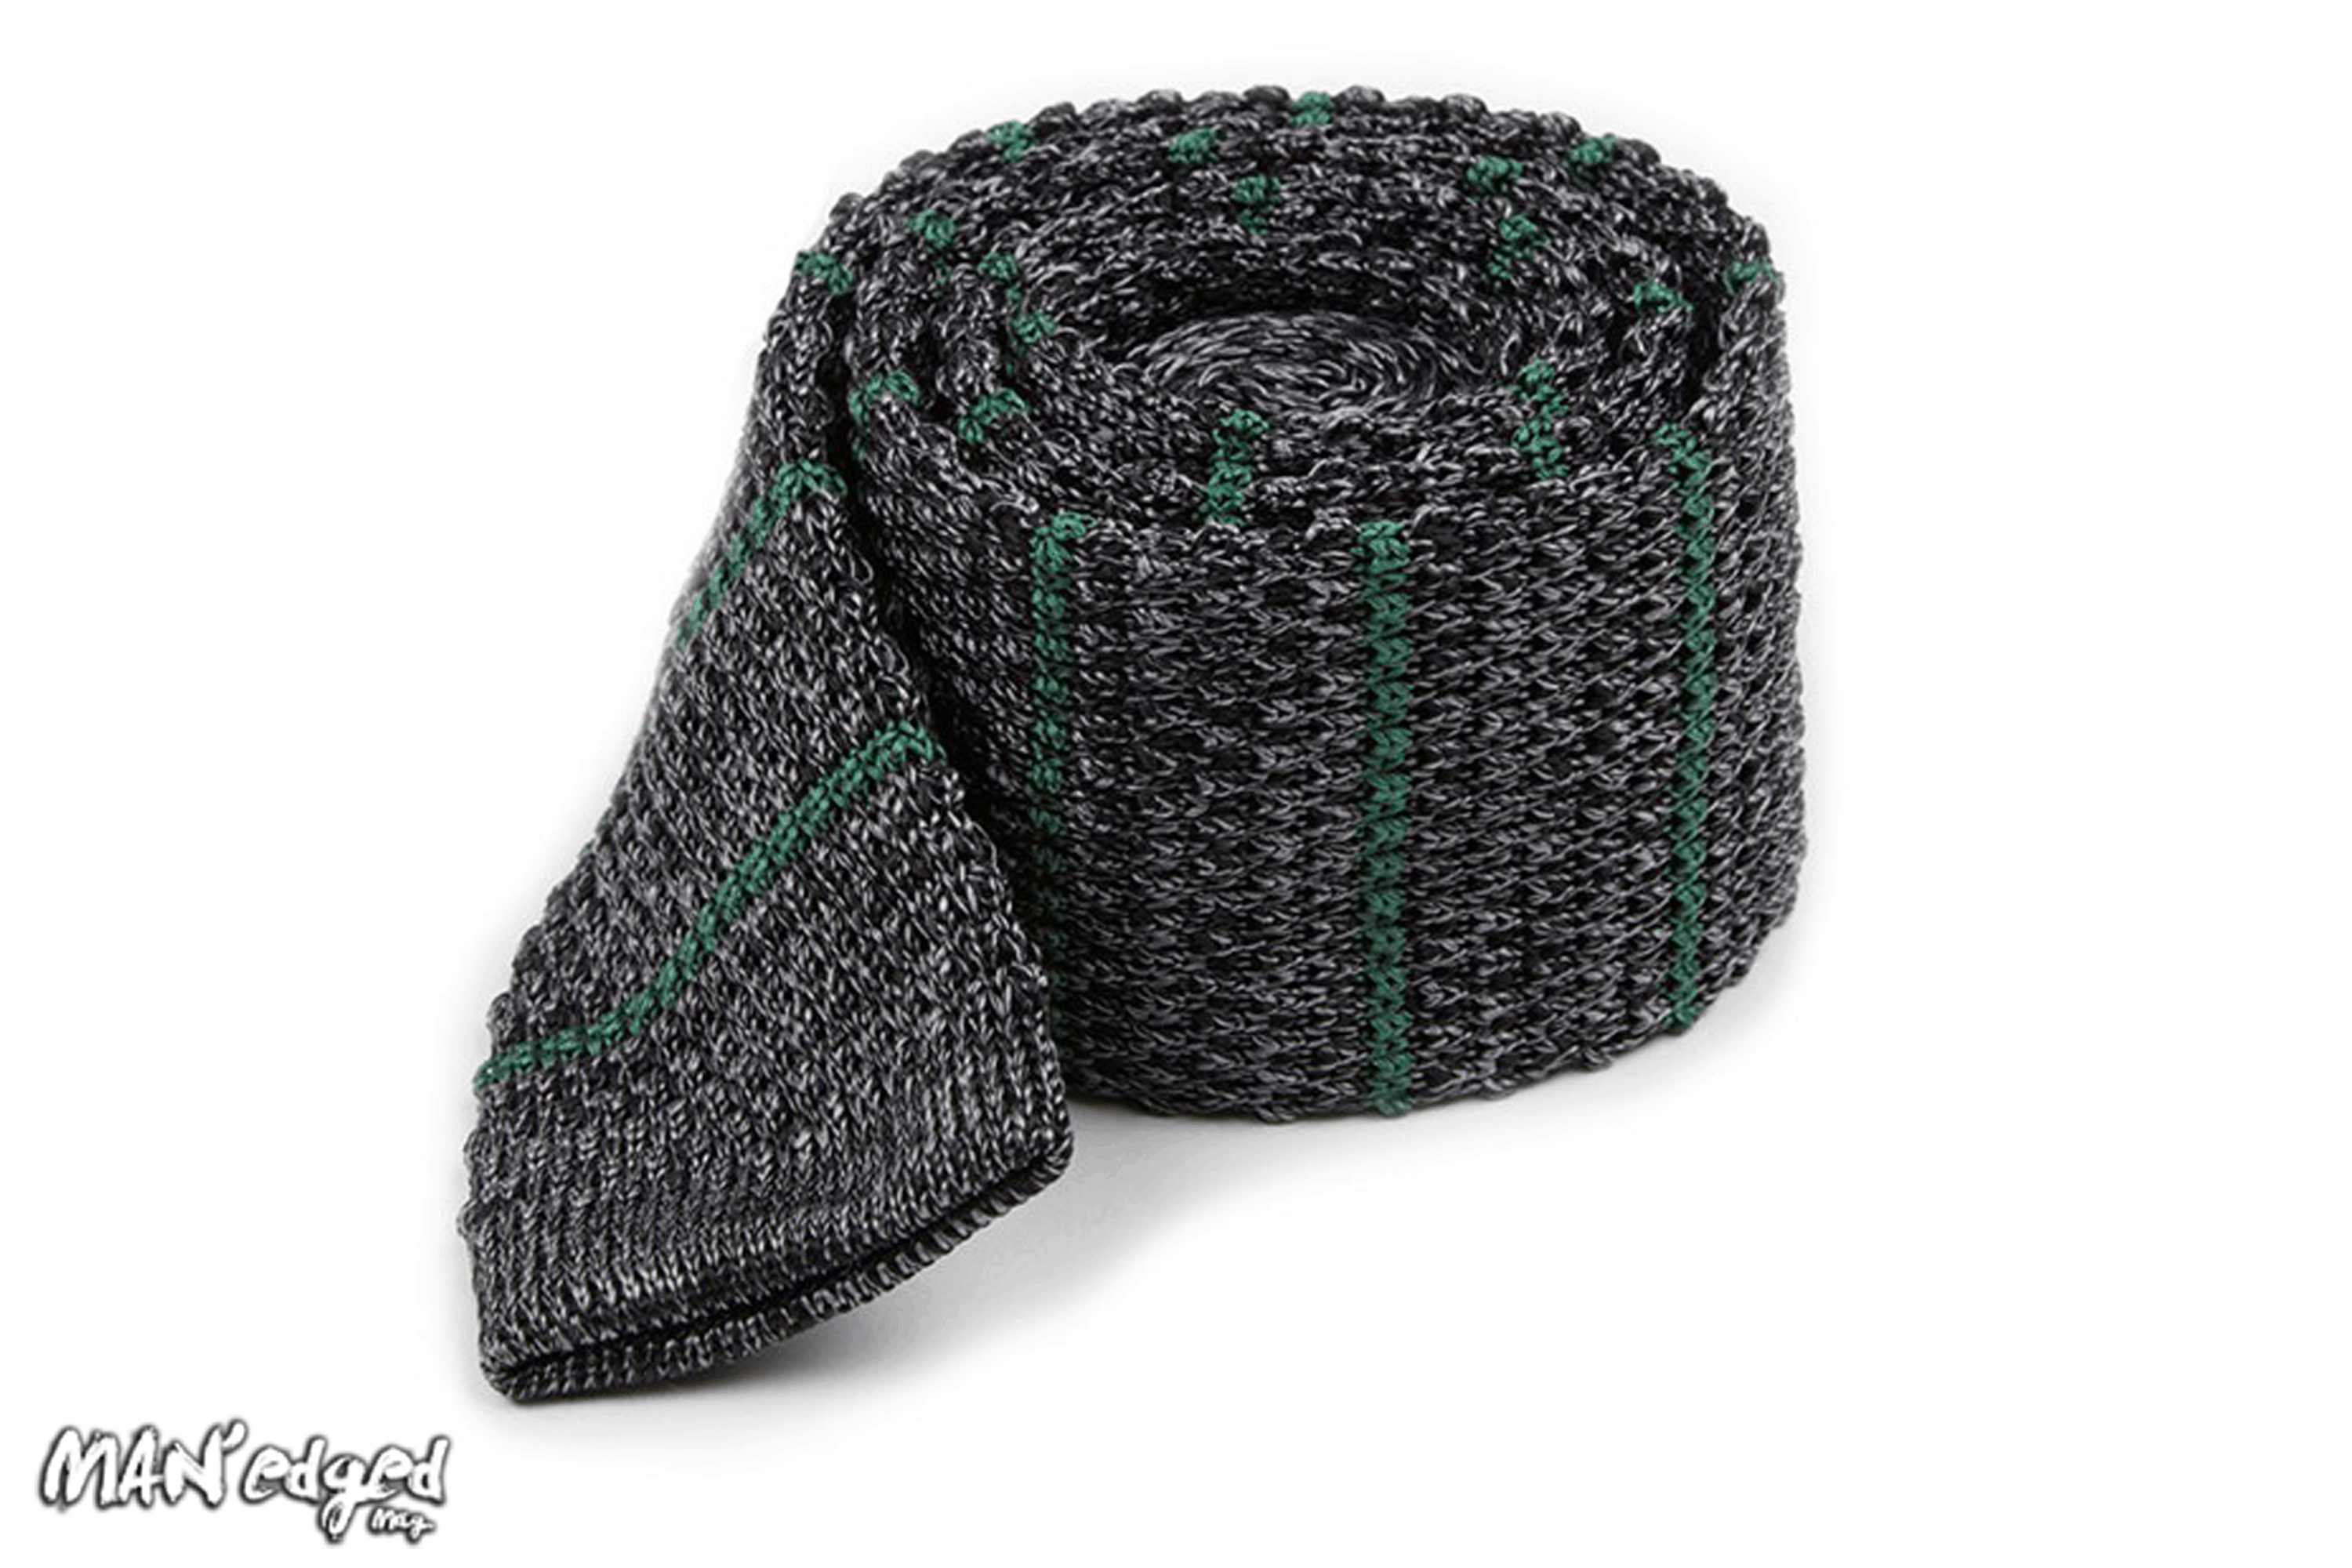 Green knit men's tie from the tie bar, featured in MAN'edged Magazine St Patricks Day men's style round up